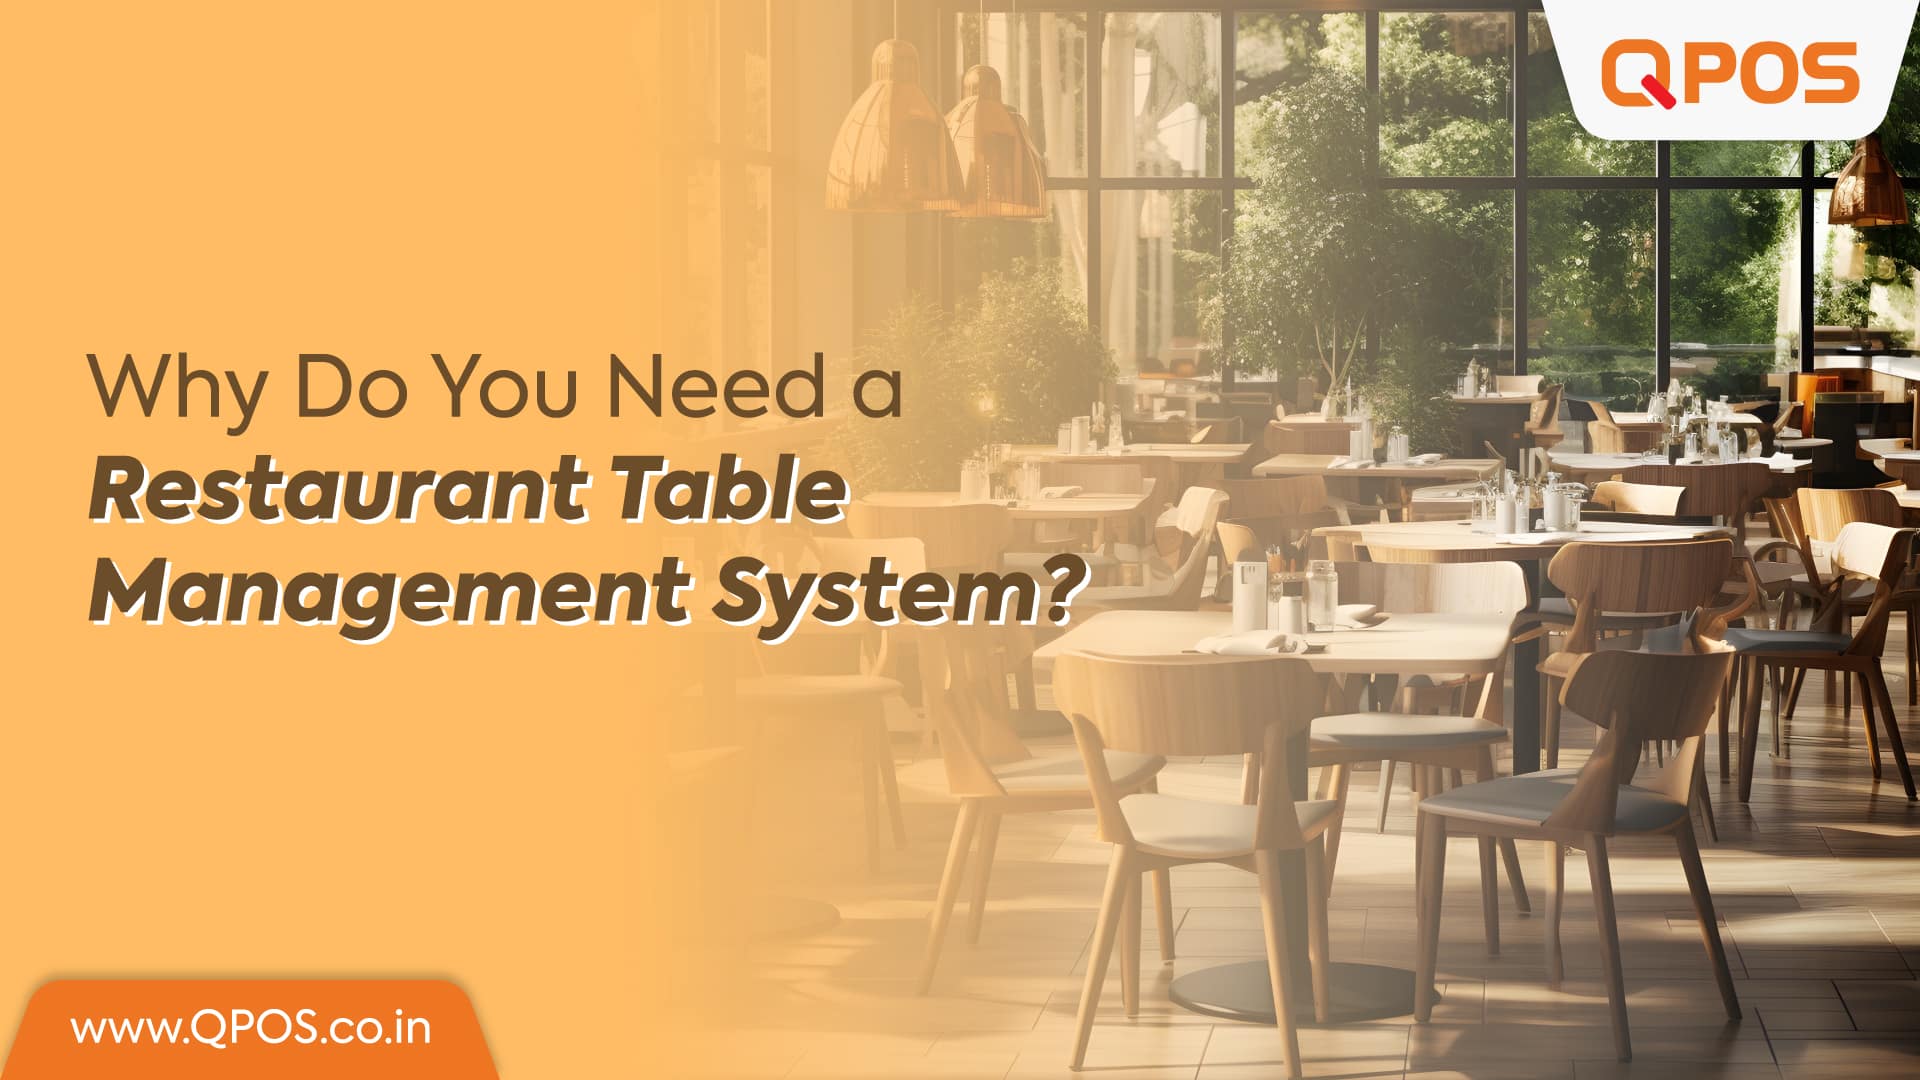 Why Do You Need a Restaurant Table Management System?